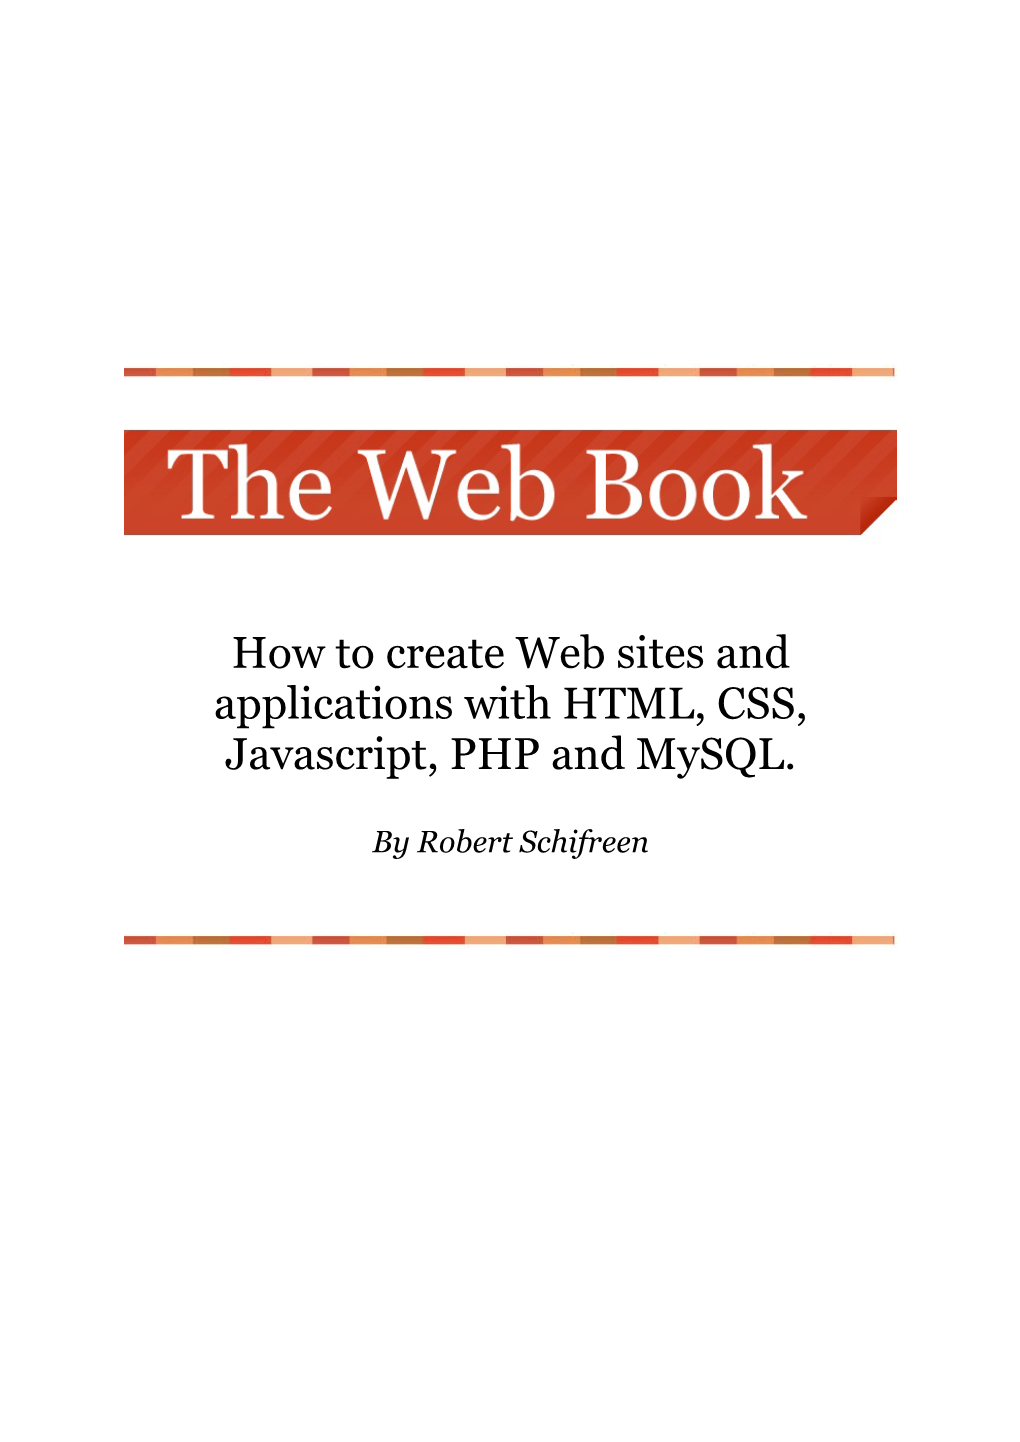 How to Create Web Sites and Applications with HTML, CSS, Javascript, PHP and Mysql